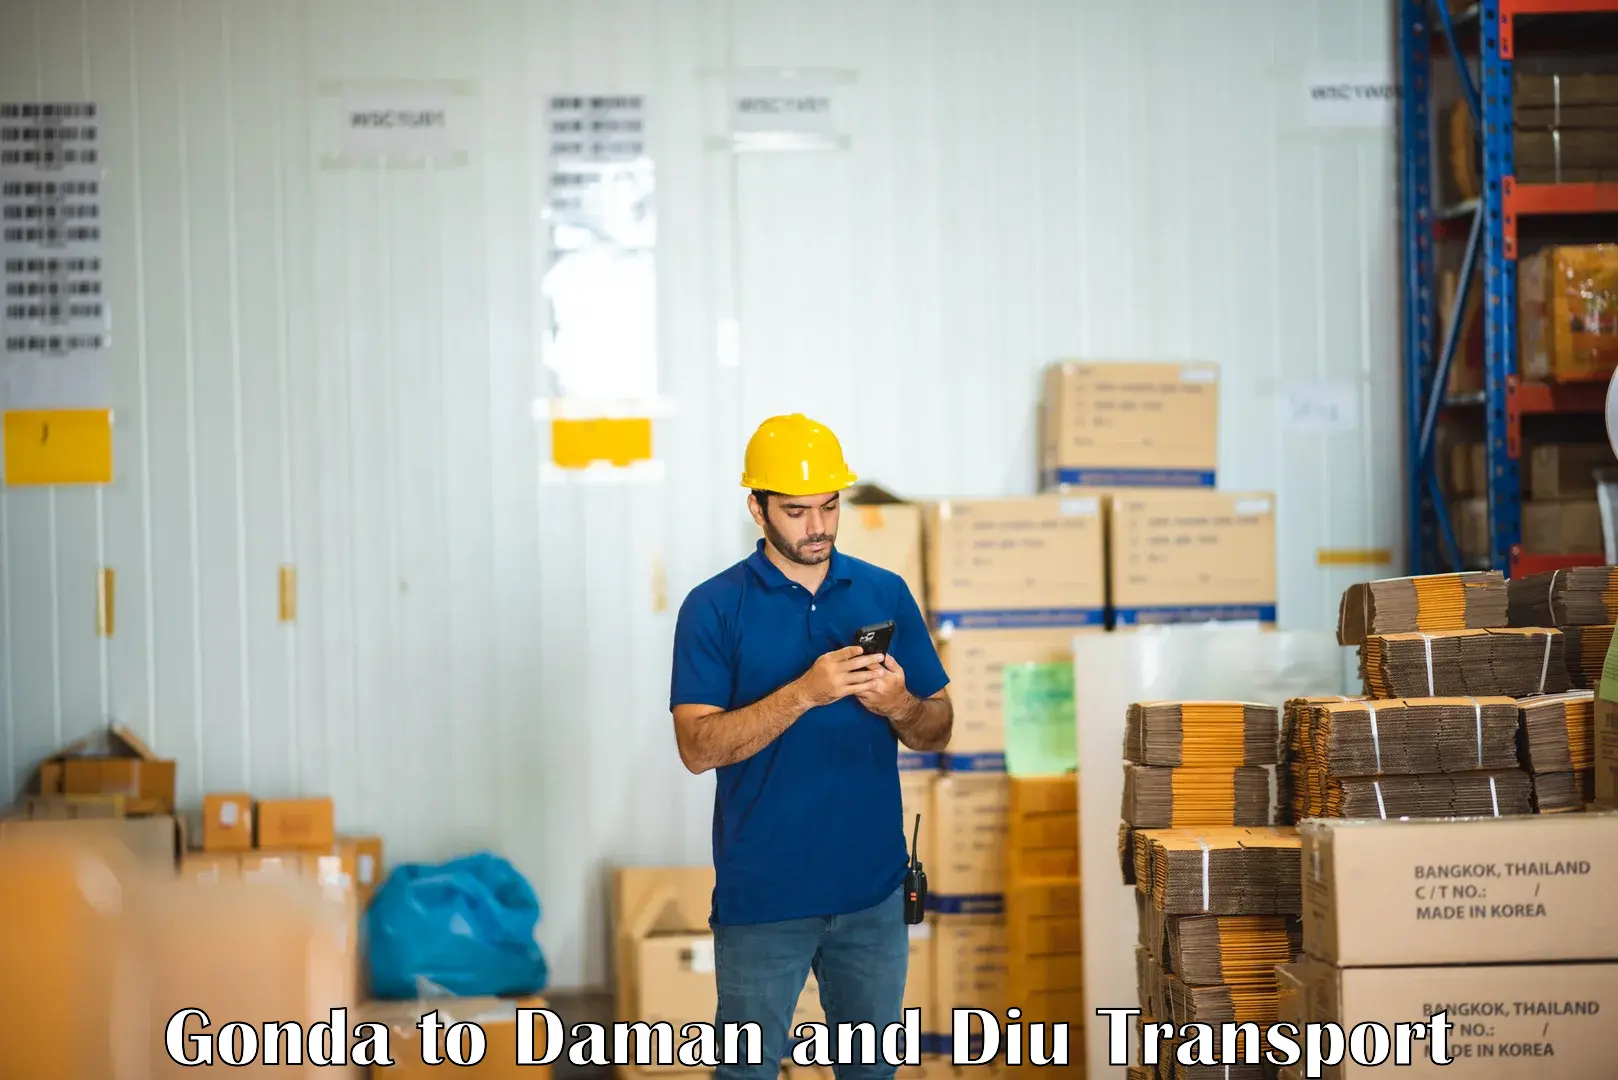 Delivery service Gonda to Daman and Diu